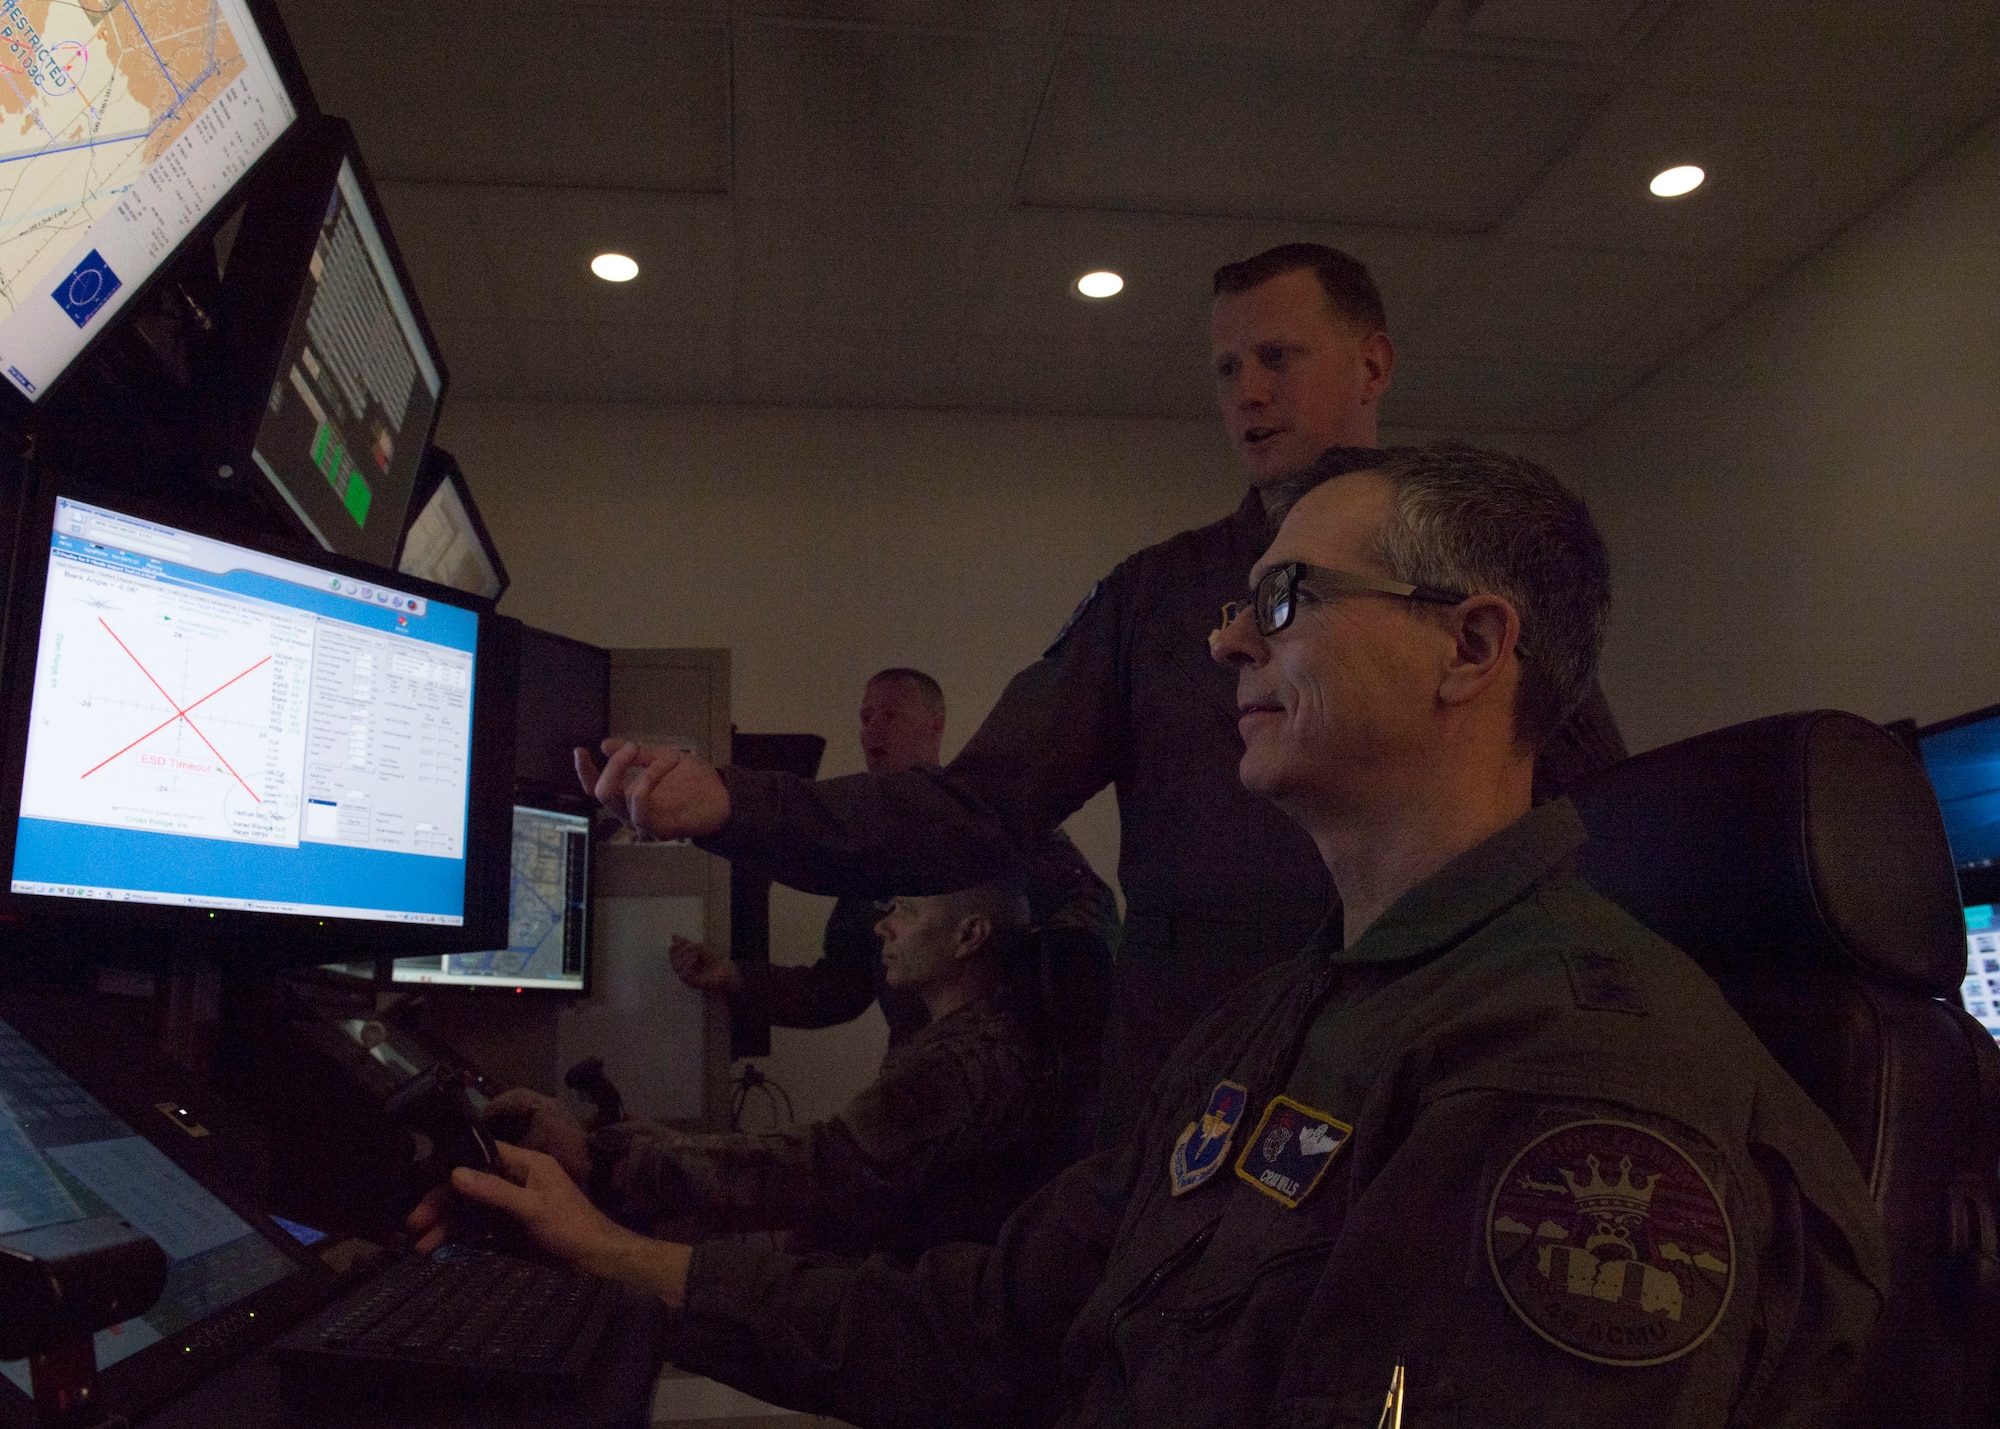 Maj. Gen. Craig D. Wills, 19th Air Force commander, flies an MQ-9 simulator with direction from Capt. Christopher, 6th Attack Squadron flight commander, Feb. 13, 2020, on Holloman Air Force Base, N.M. The 16th Attack Squadron uses MQ-9 simulators to train pilots and sensor operators for their field. (U.S. Air Force photo by Airman 1st Class Autumn Vogt)